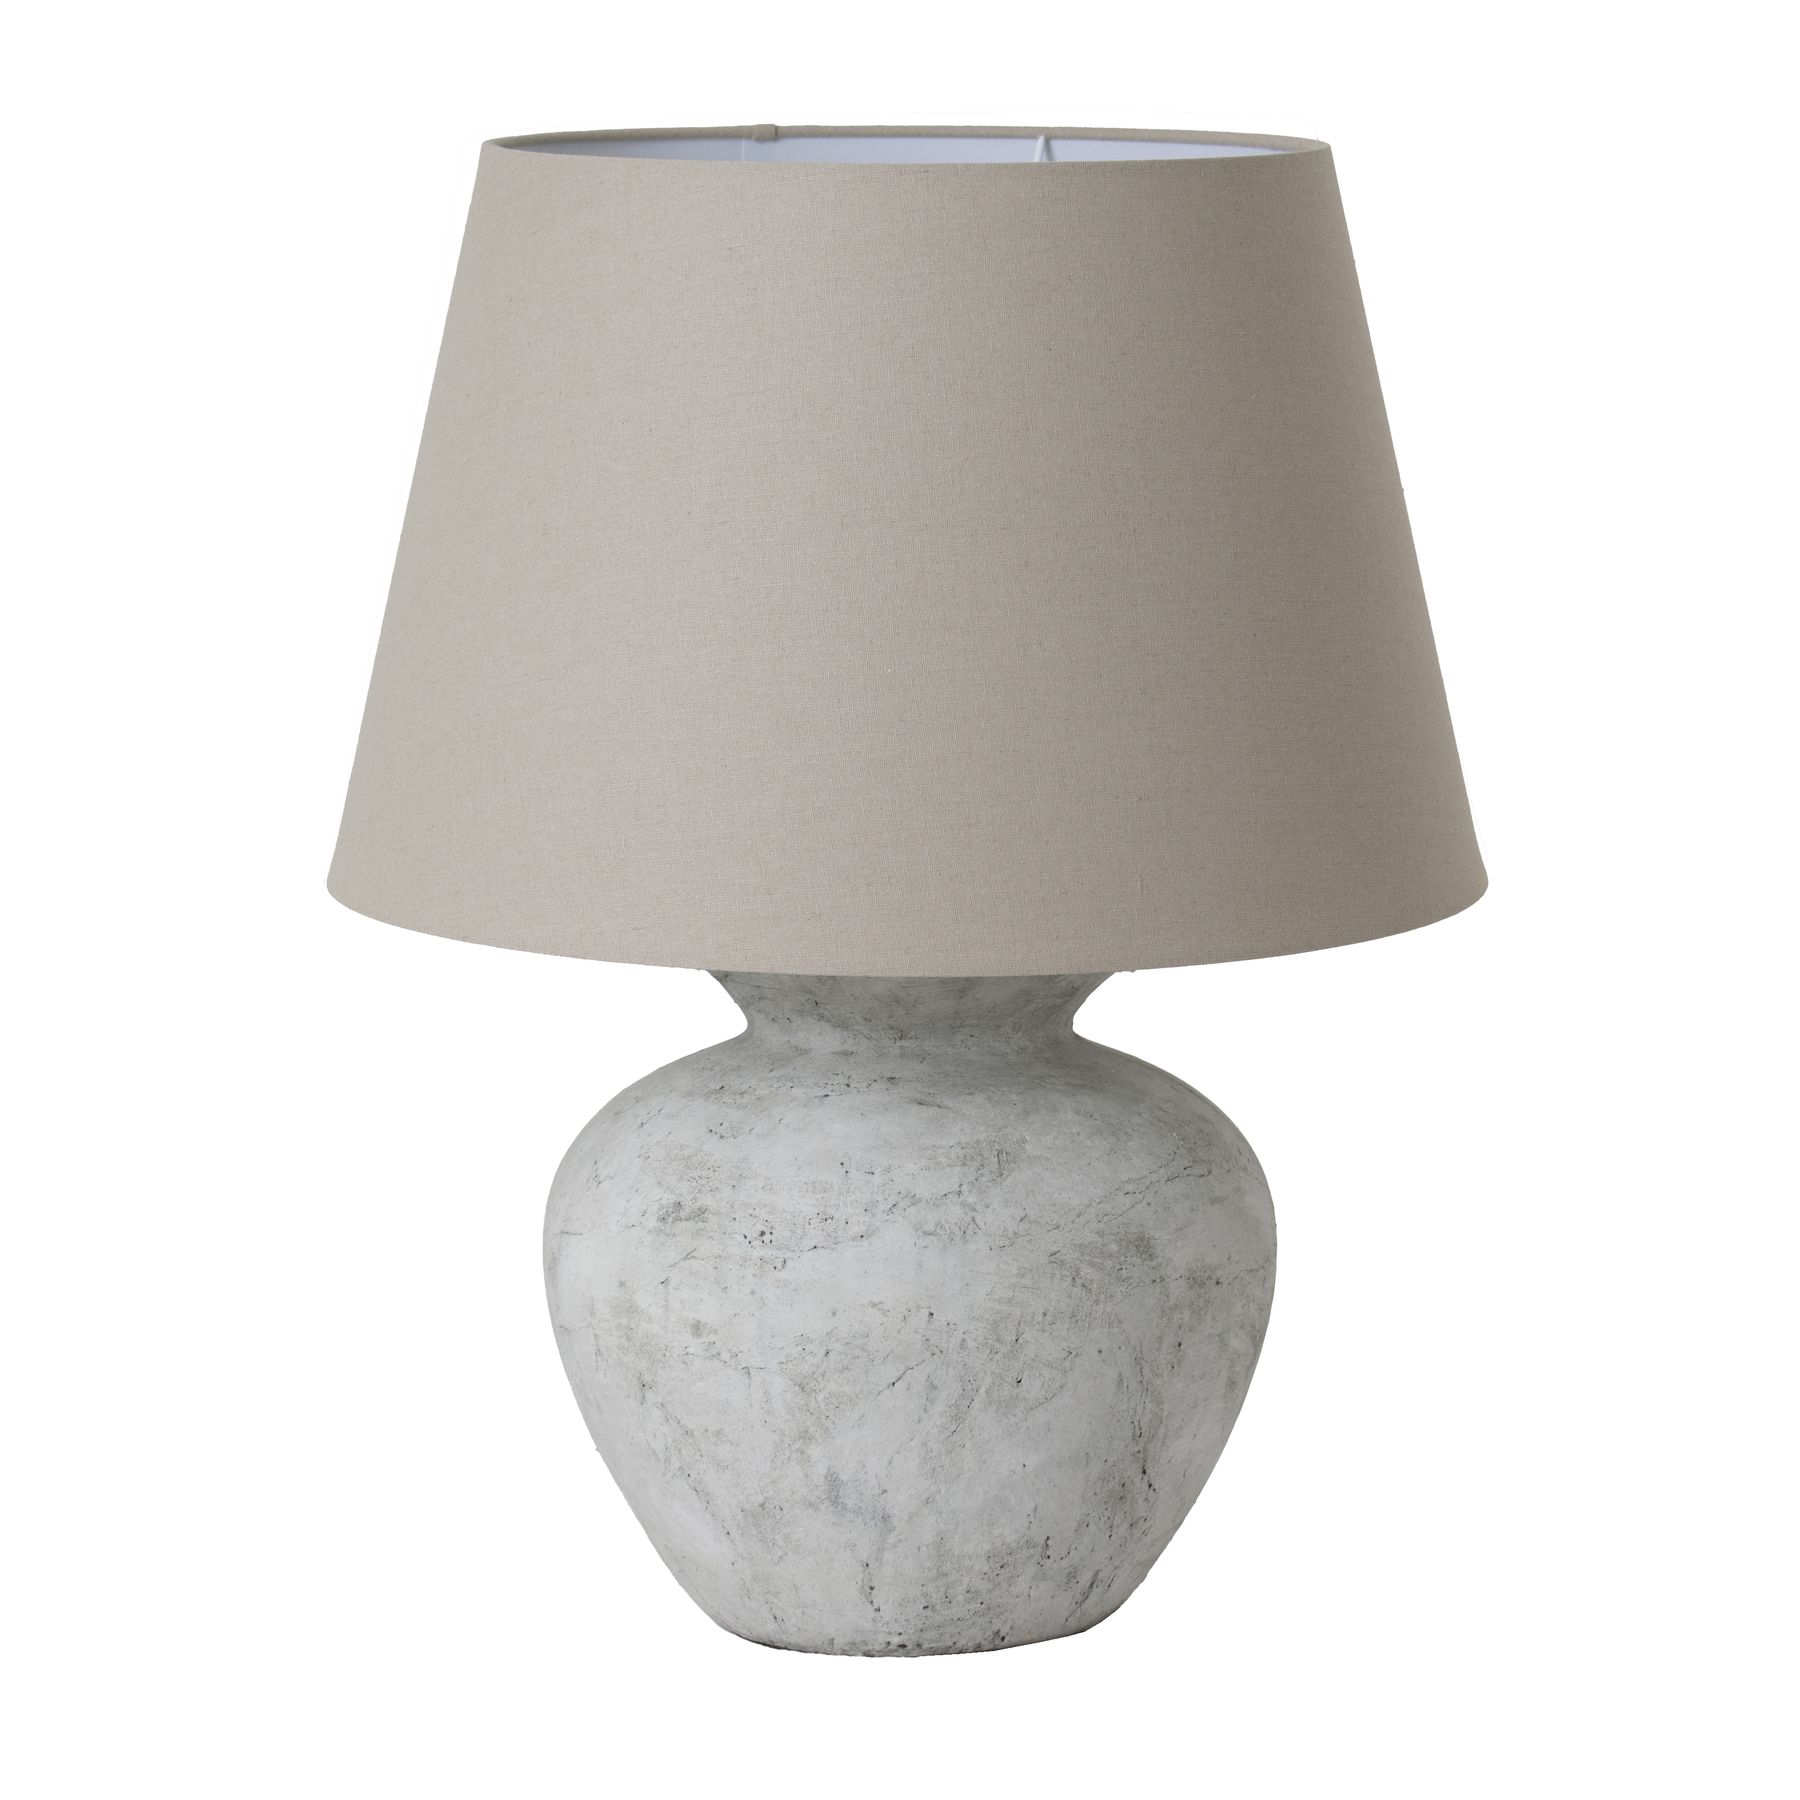 Darcy Antique White Round Table Lamp With Linen Shade - Image 1